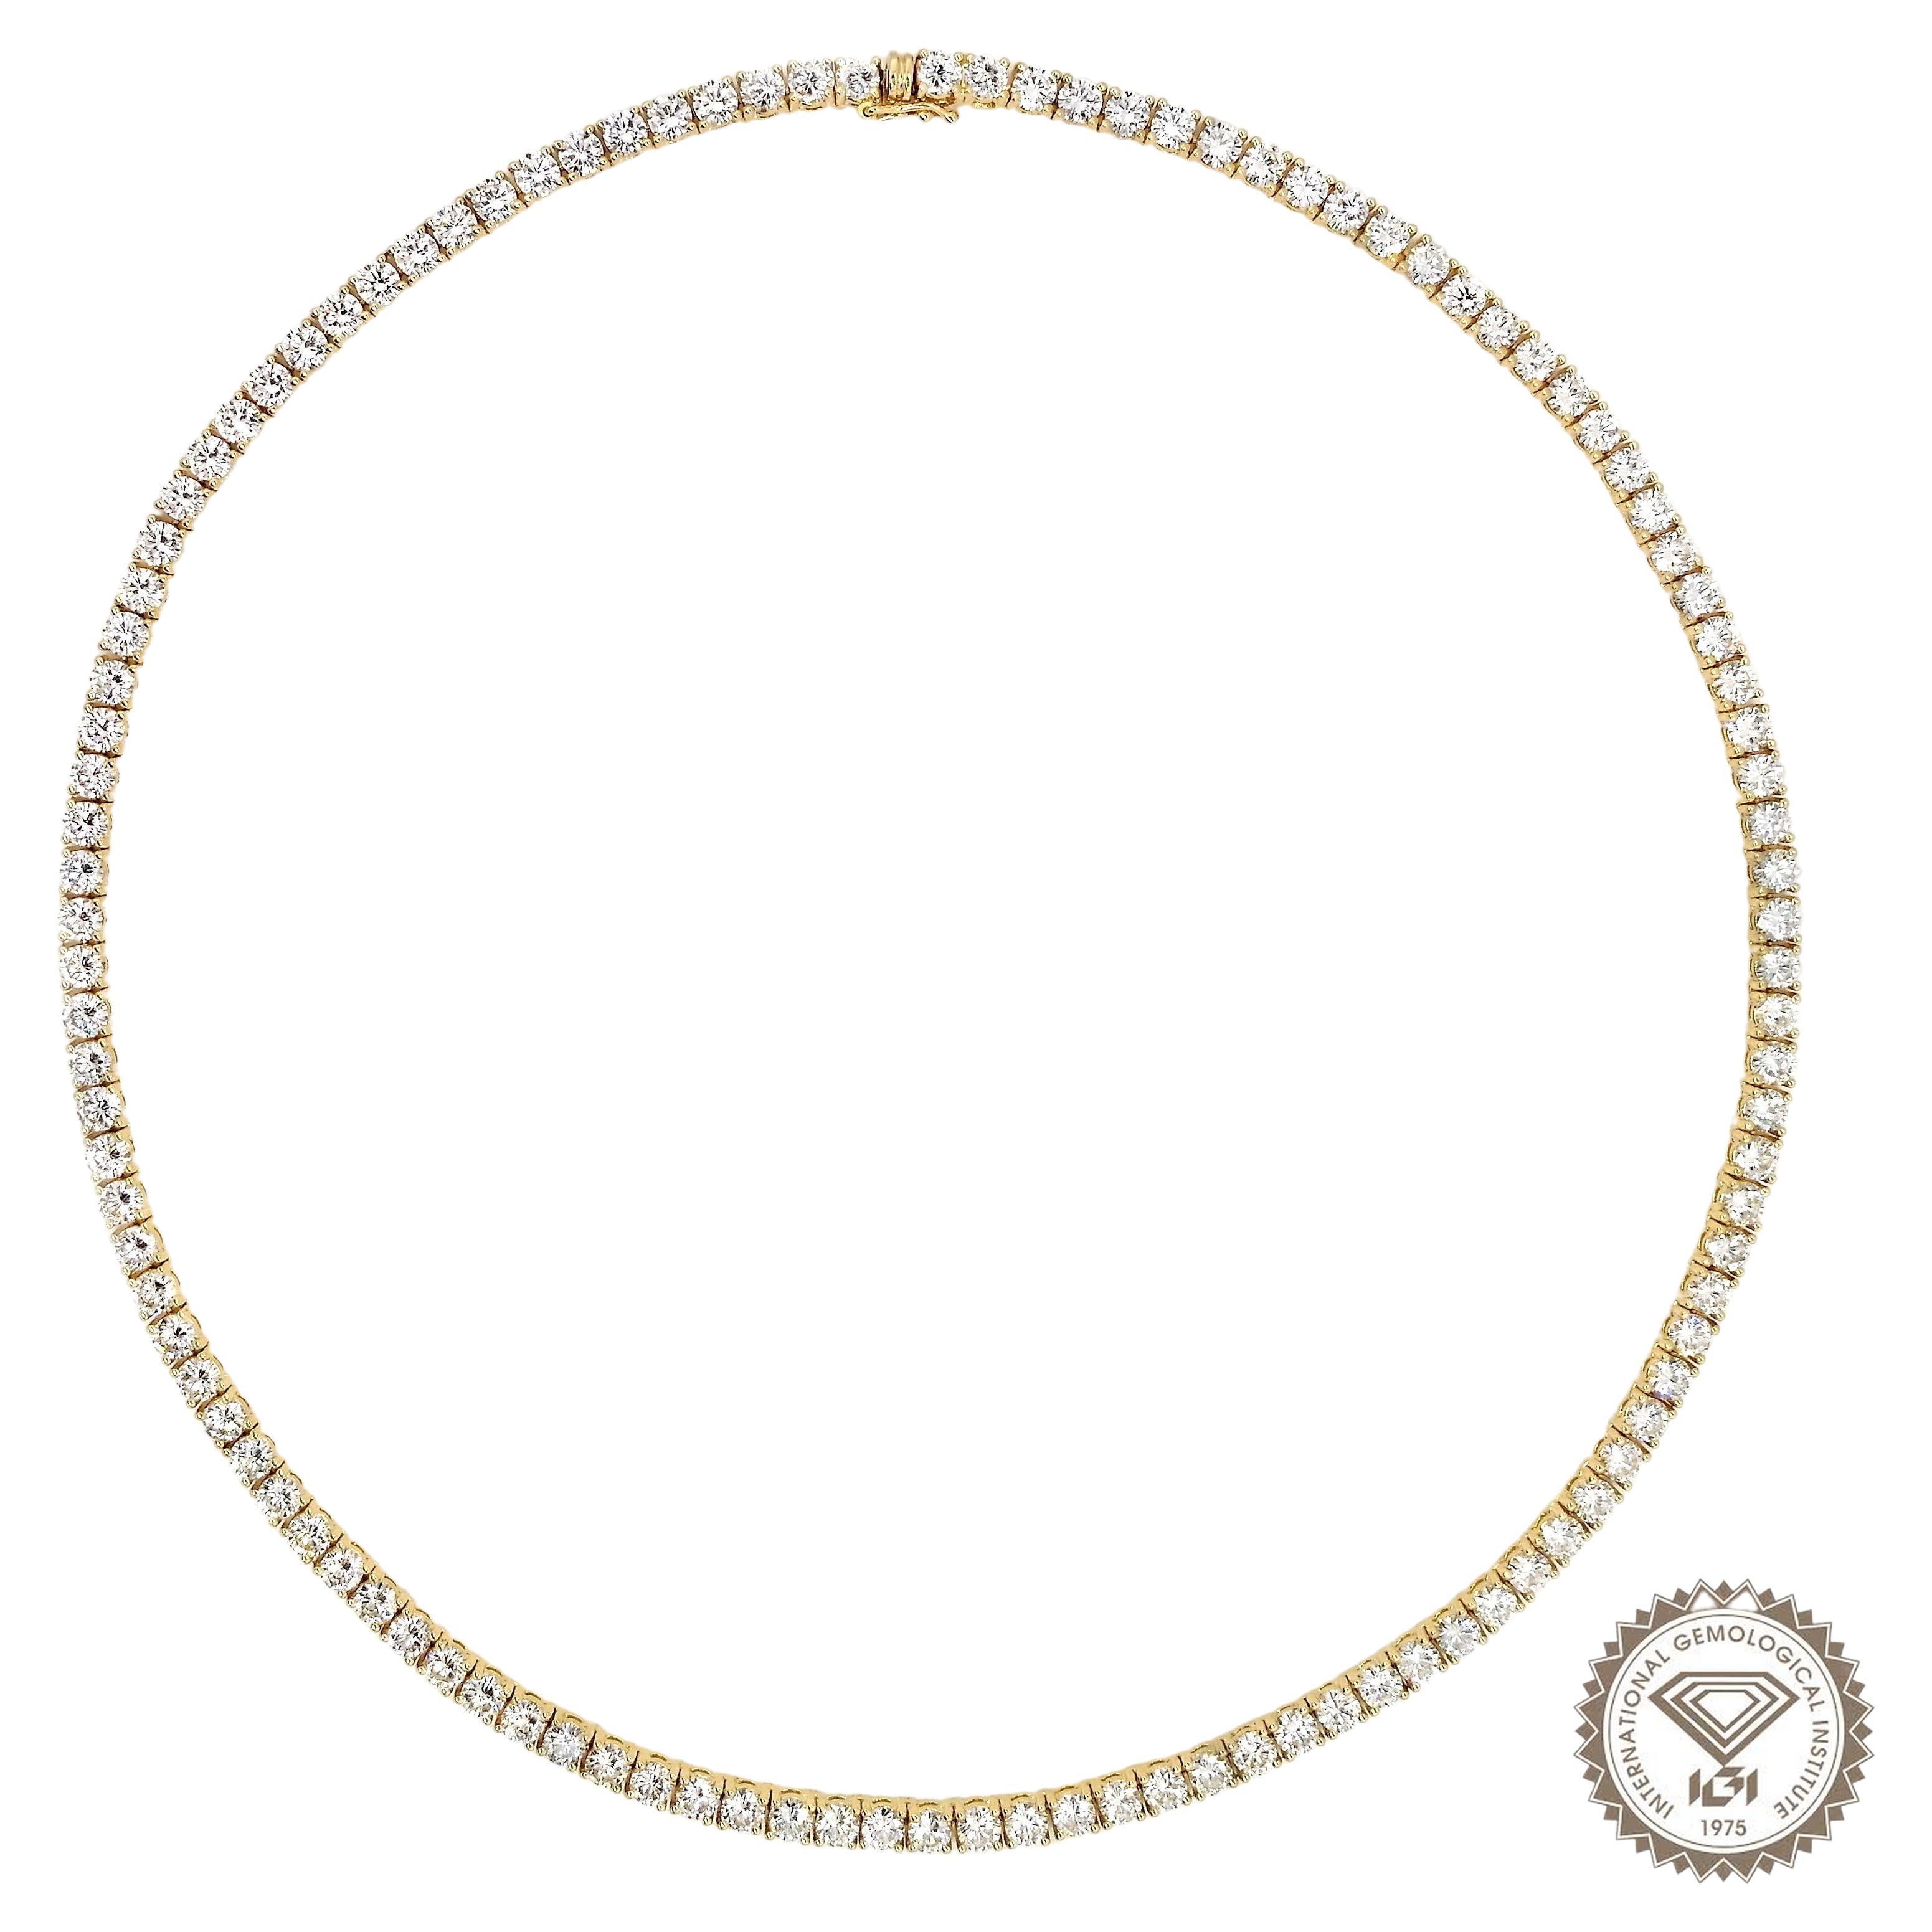 IGI Certified 16.93ct Natural White Diamonds Yellow Gold Necklace